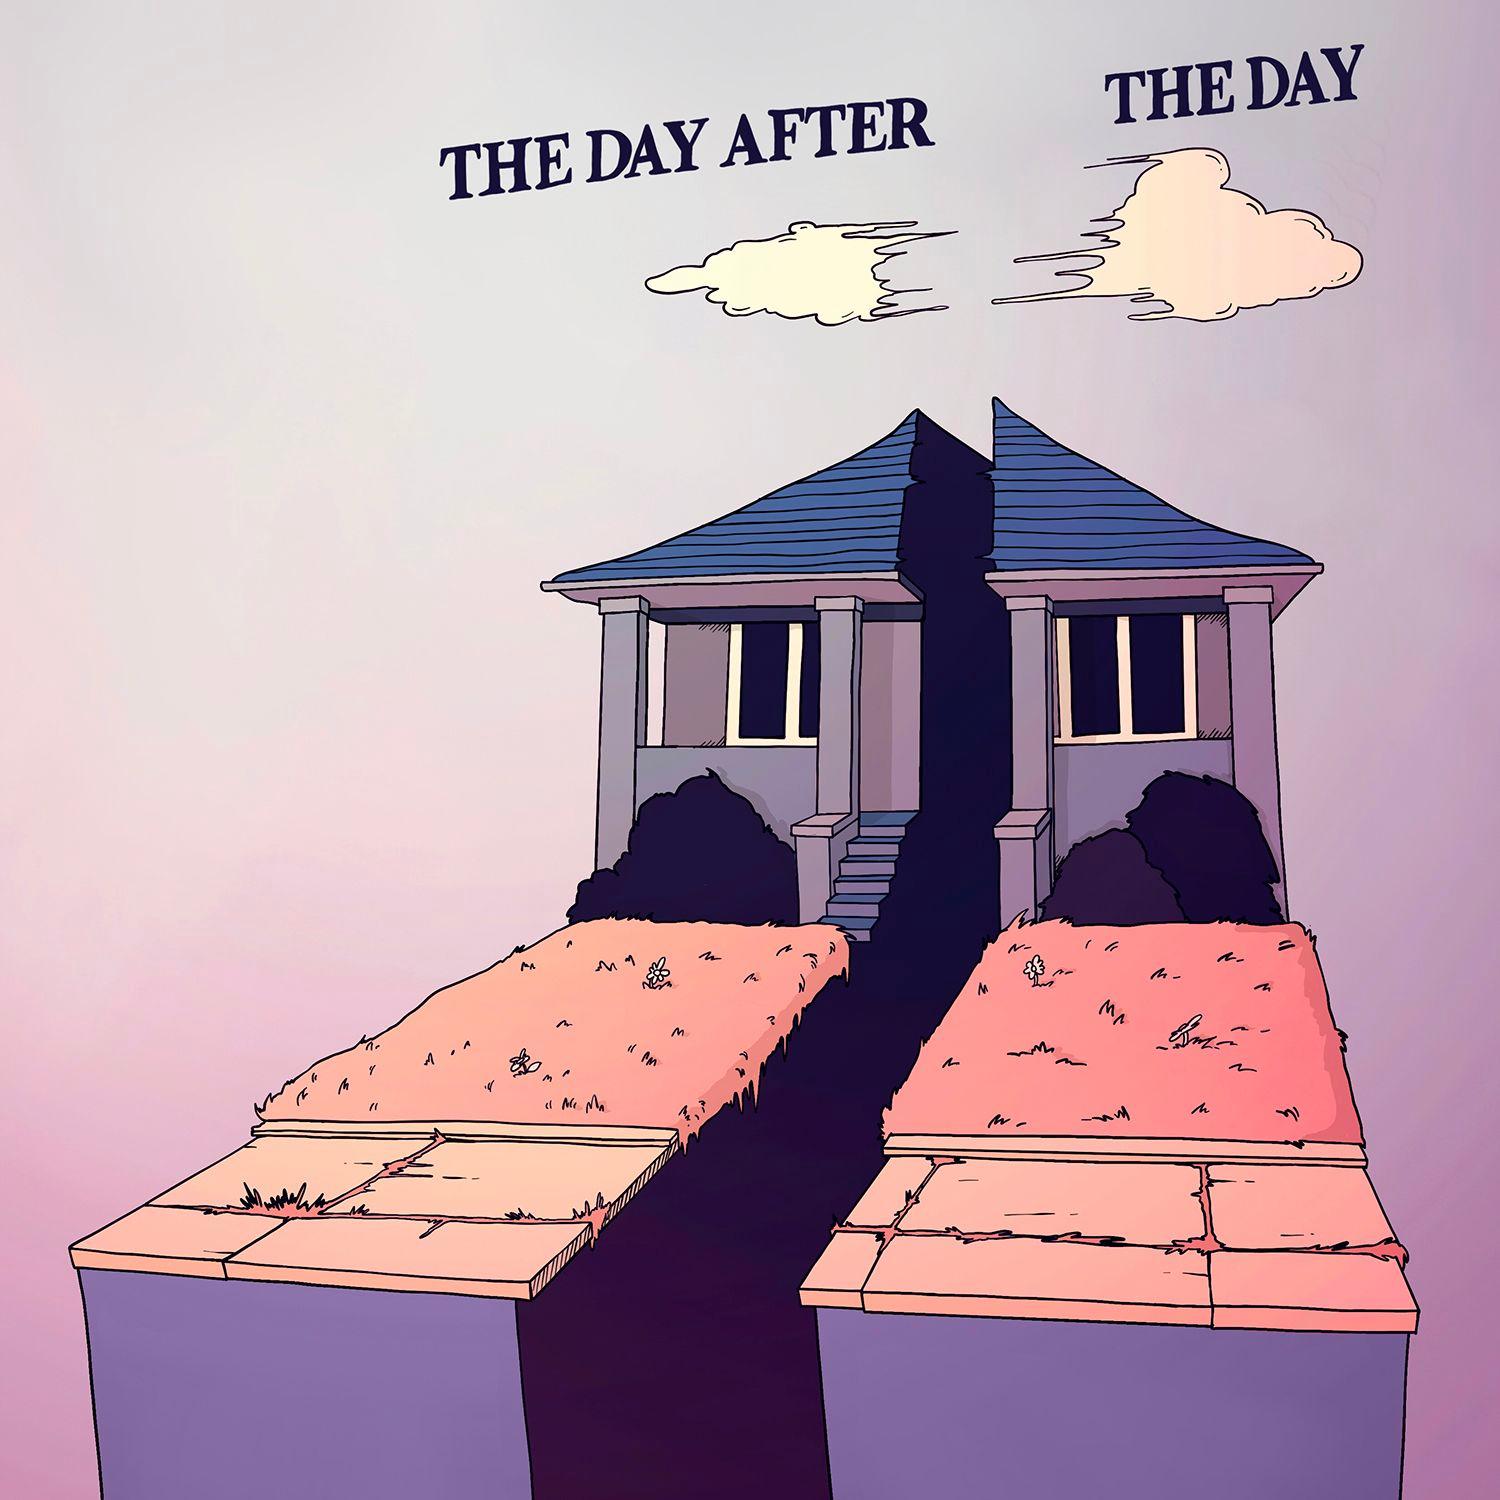 Thumbnail for "202 - The Day After the Day".